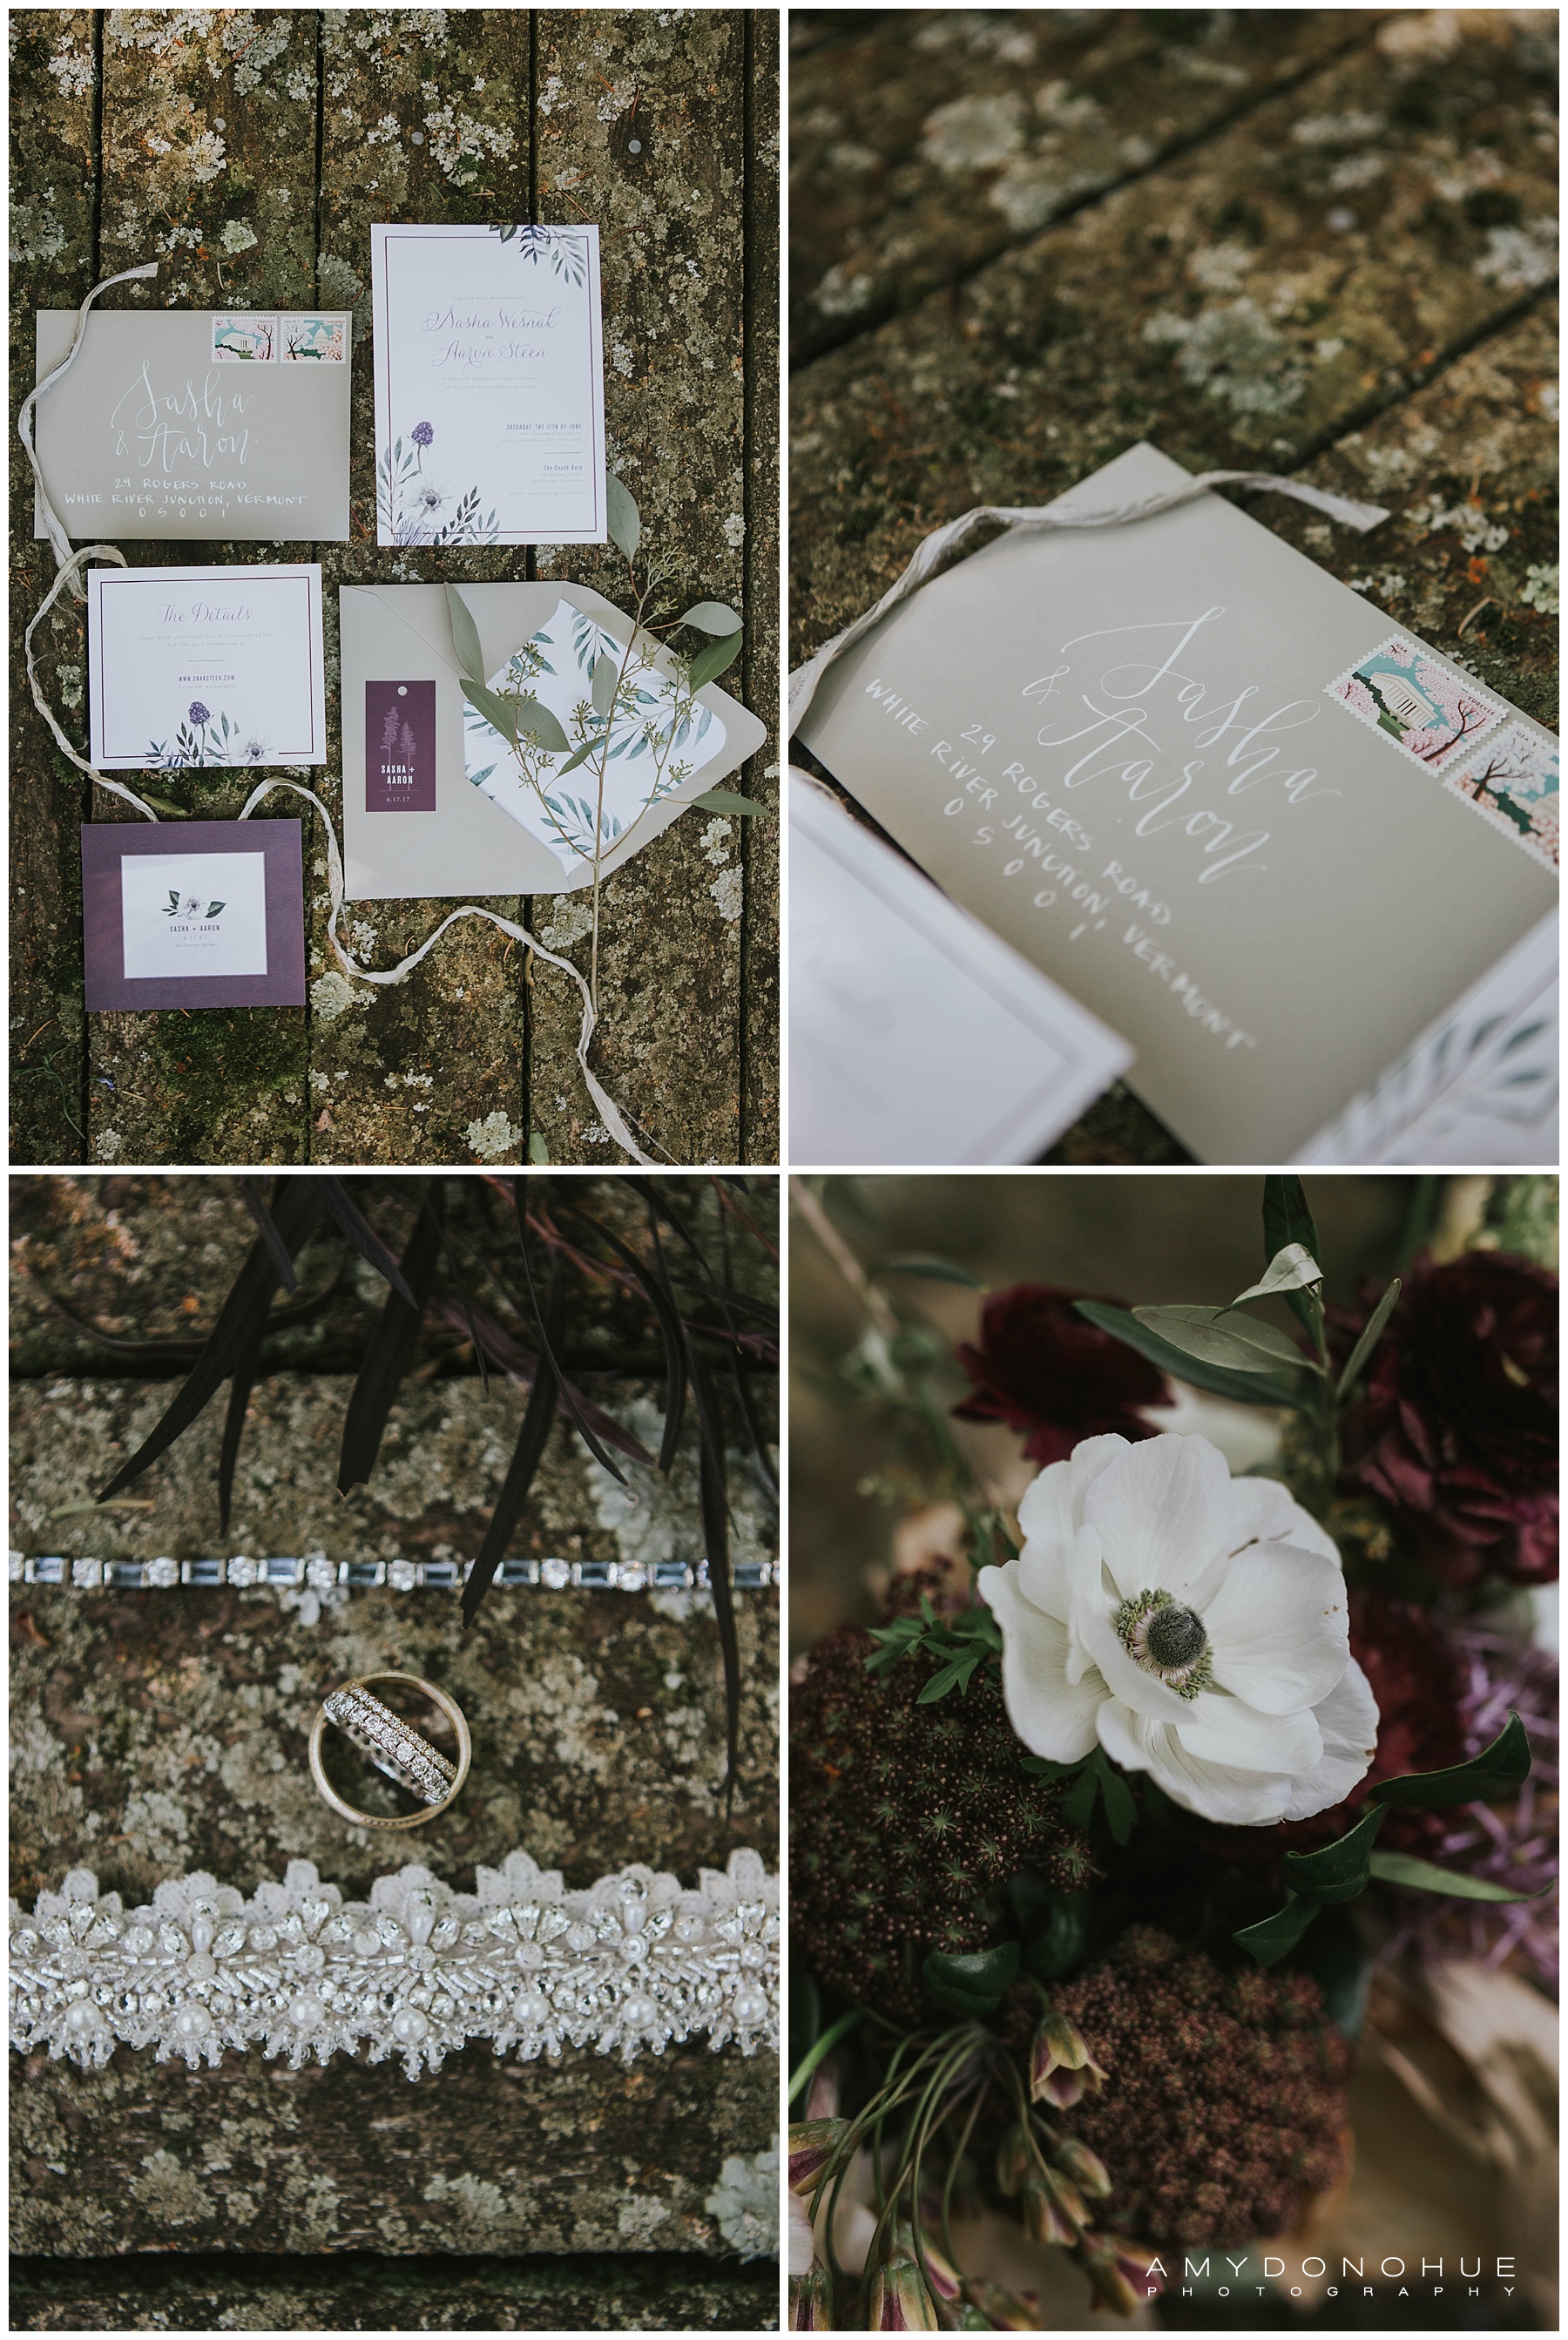 Wedding Invitations by Lulu & Roo Design Studio | Photography by Amy Donohue Photography